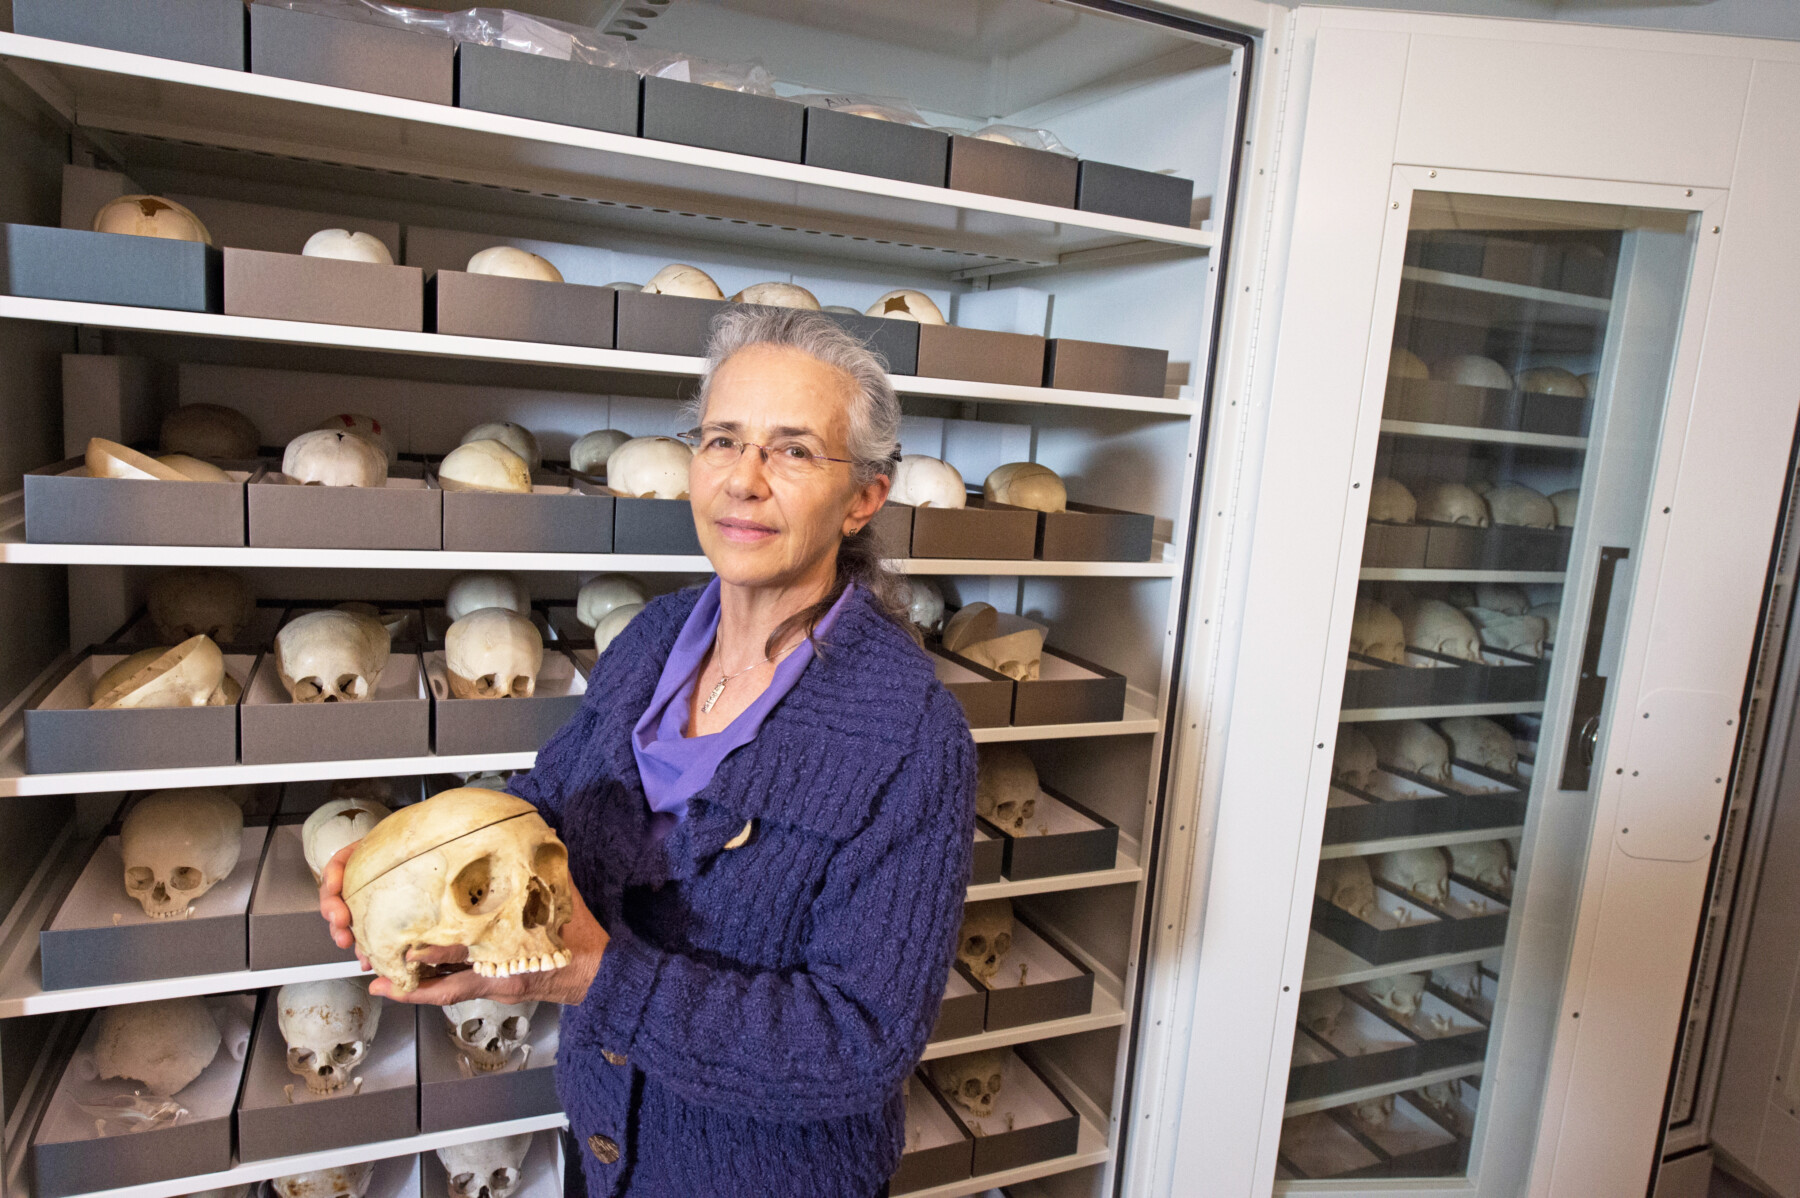 Dodi in front of collection holding a skull